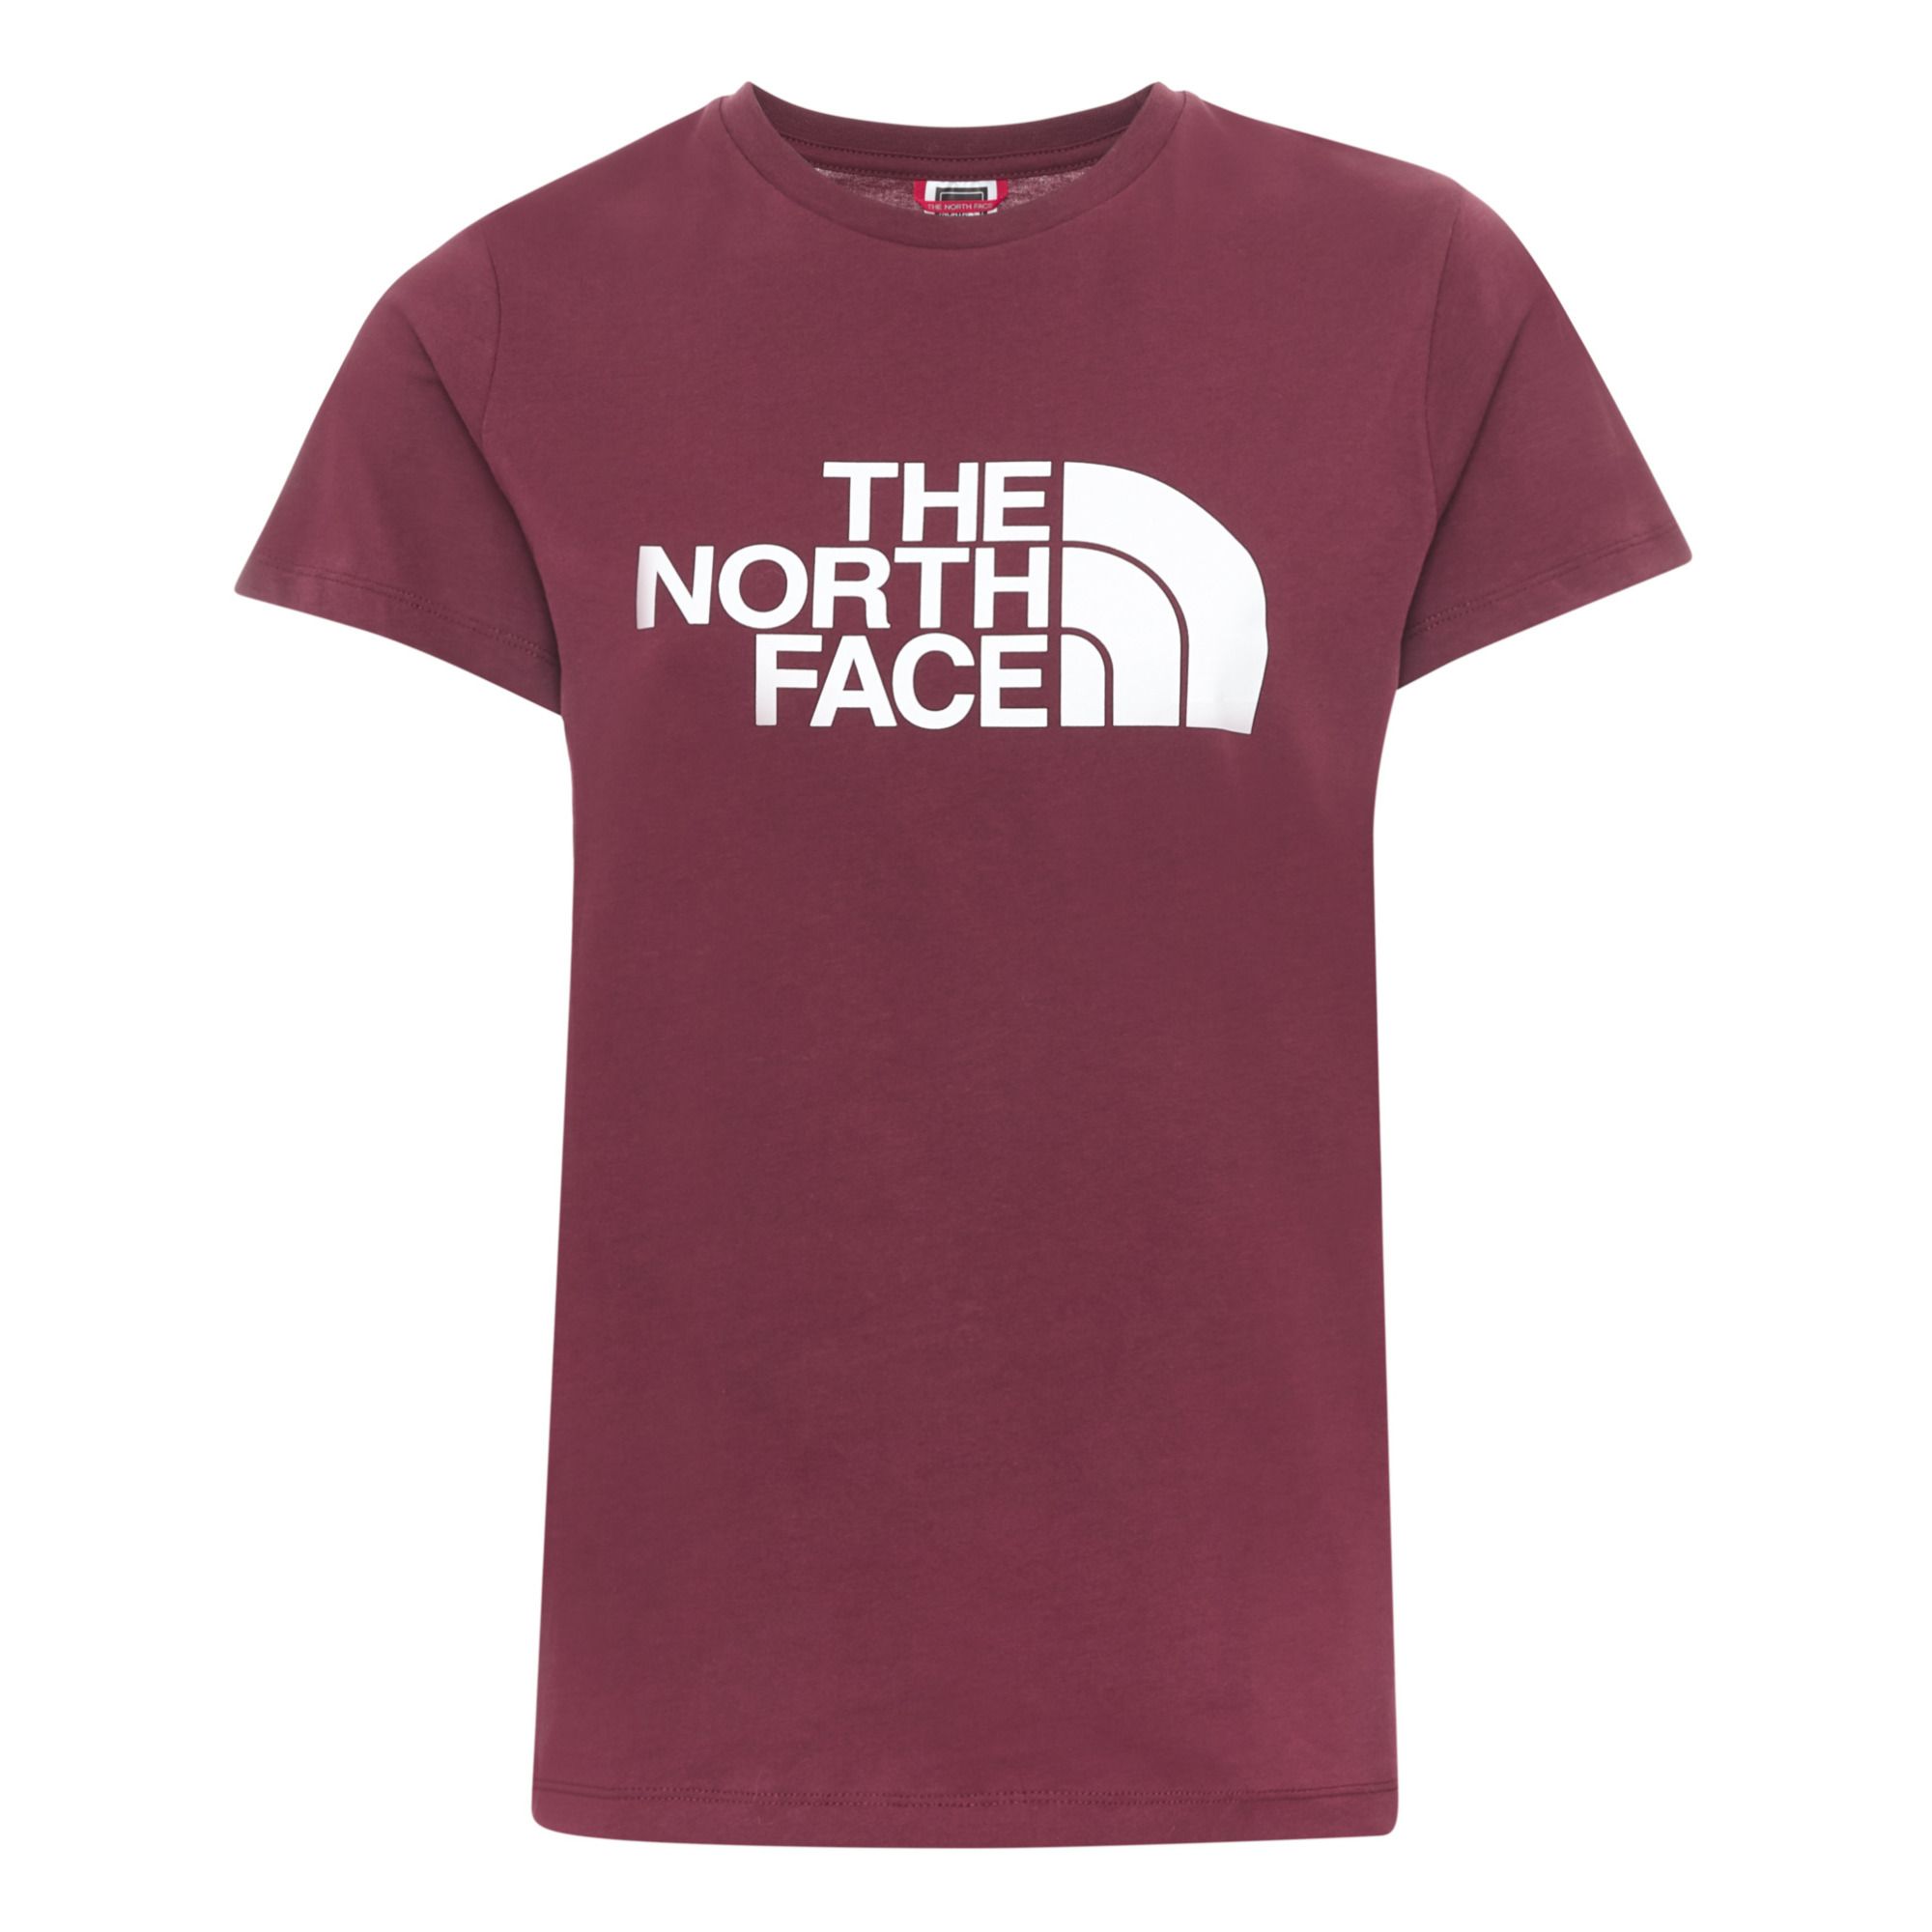 The North Face - T-shirt Easy - Collection Femme - - Rouge foncé